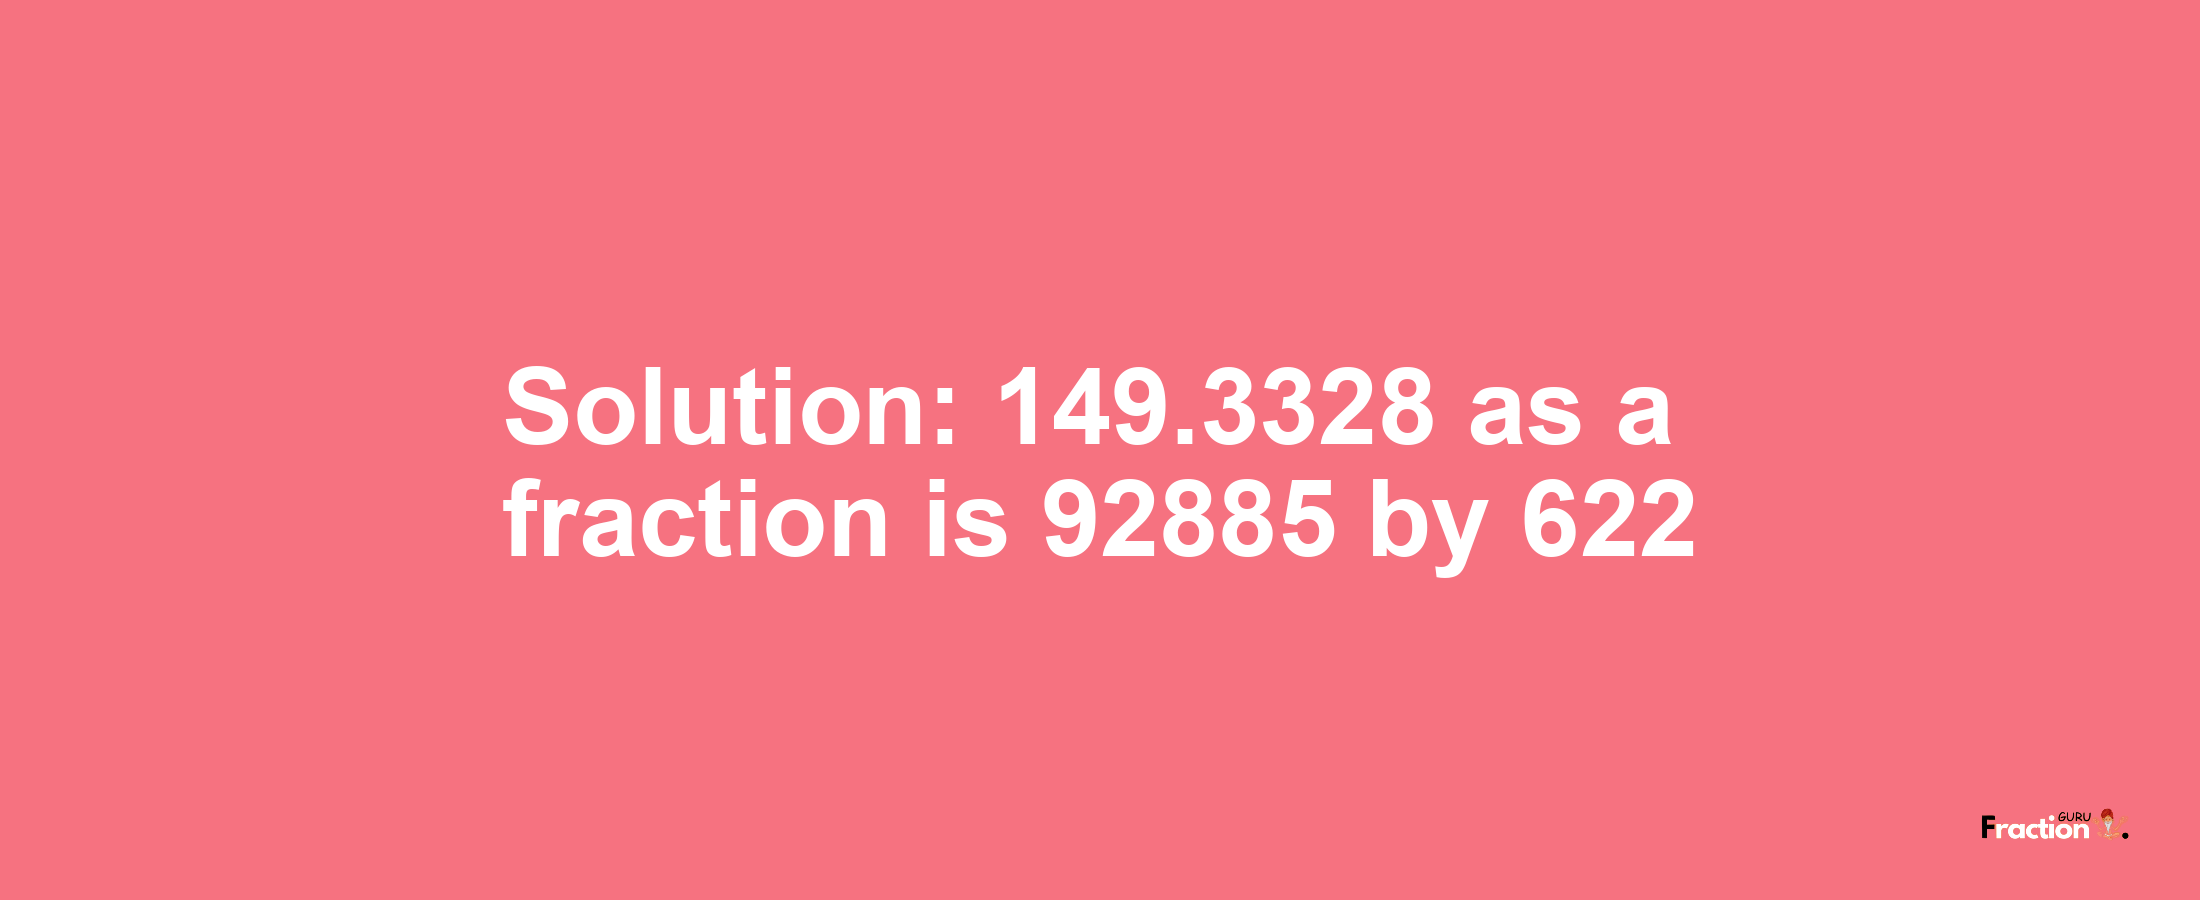 Solution:149.3328 as a fraction is 92885/622